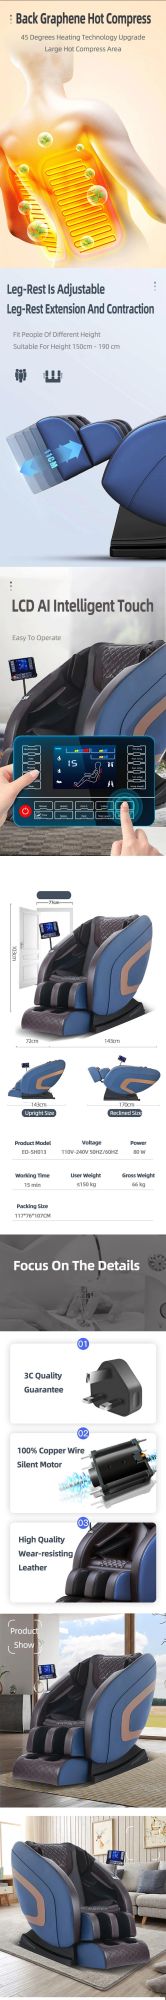 Big Screen Controller Intelligent Electric Massage Chair Recliner China Wholesale Massage Chair Price